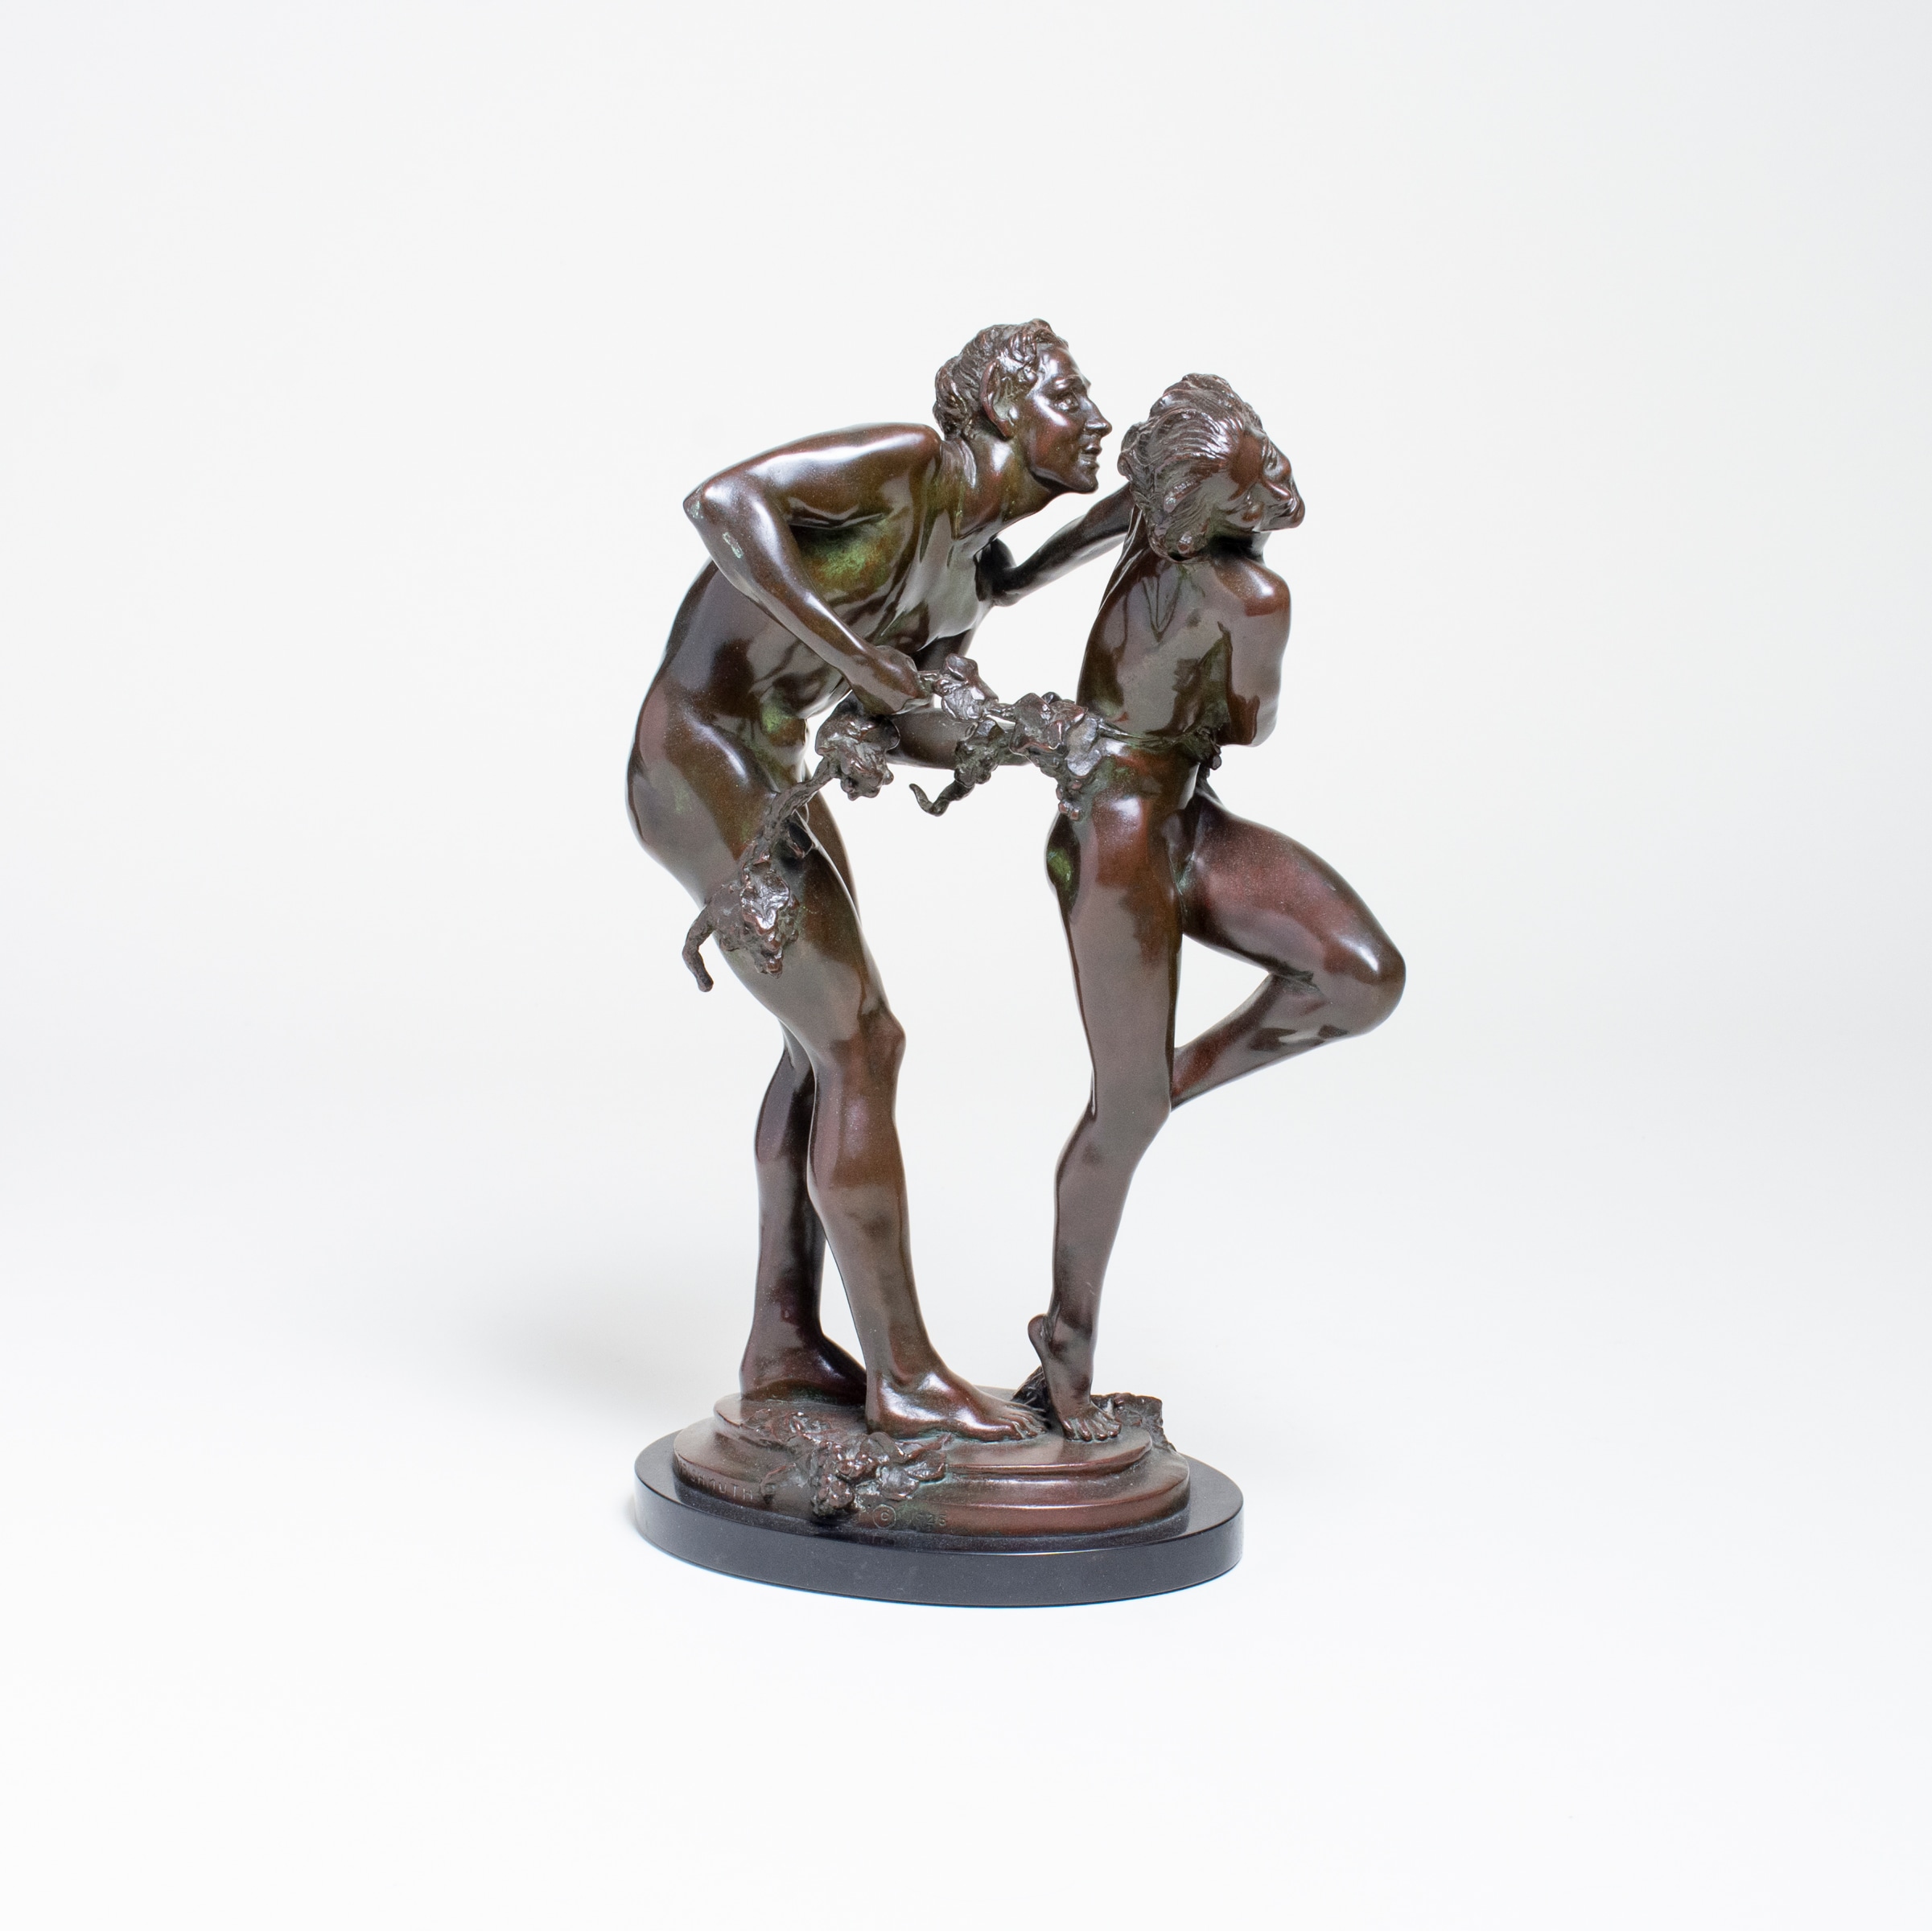 a sculpture of two dancers posing like a satyr and nymph, by harriet whitney frishmuth a woman sculptor from new york